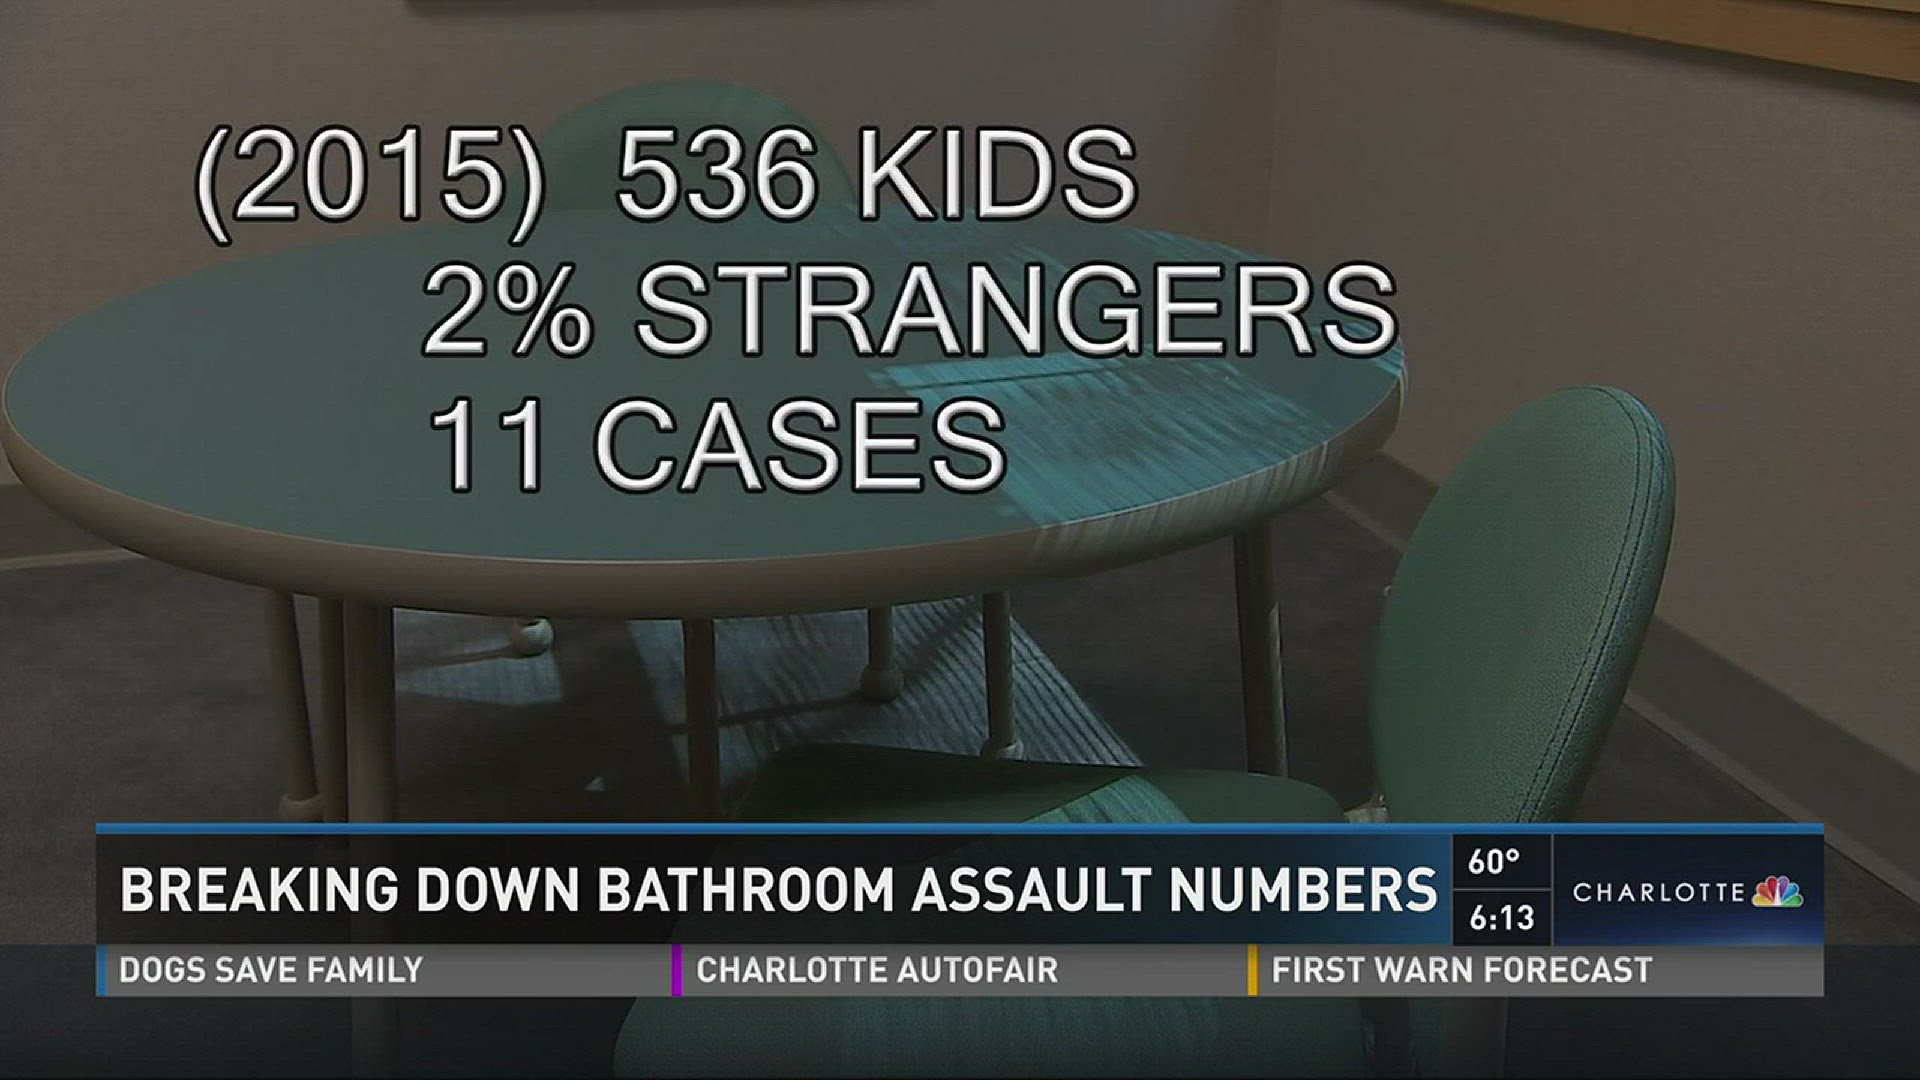 A child advocacy center shared statistics with NBC Charlotte about assaults in bathrooms.